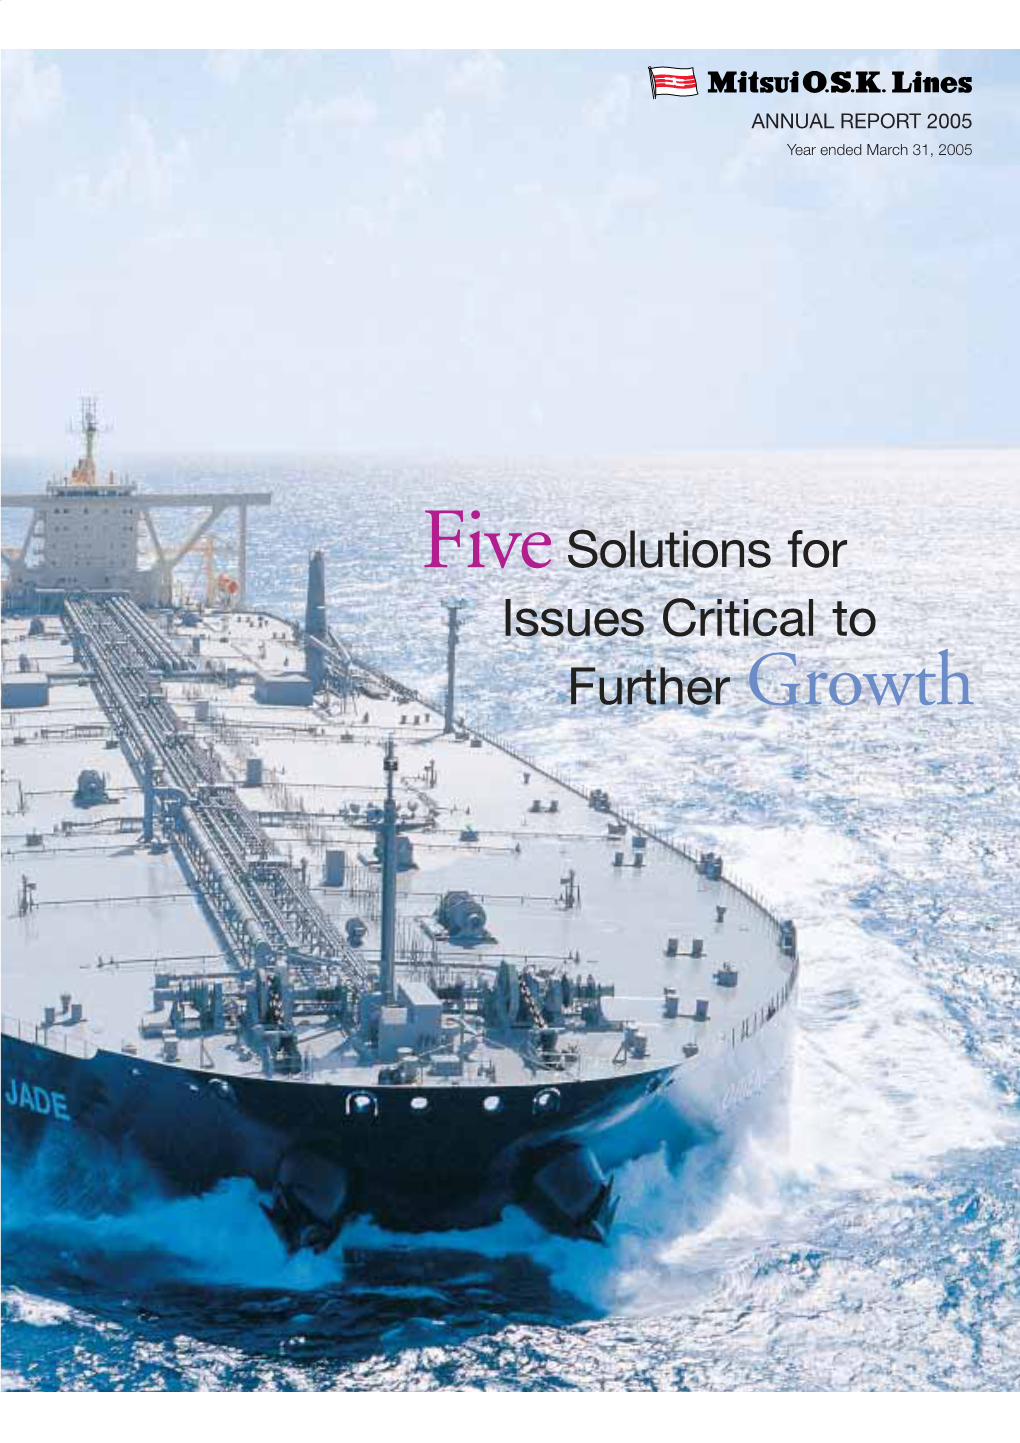 Fivesolutions for Issues Critical to Further Growth